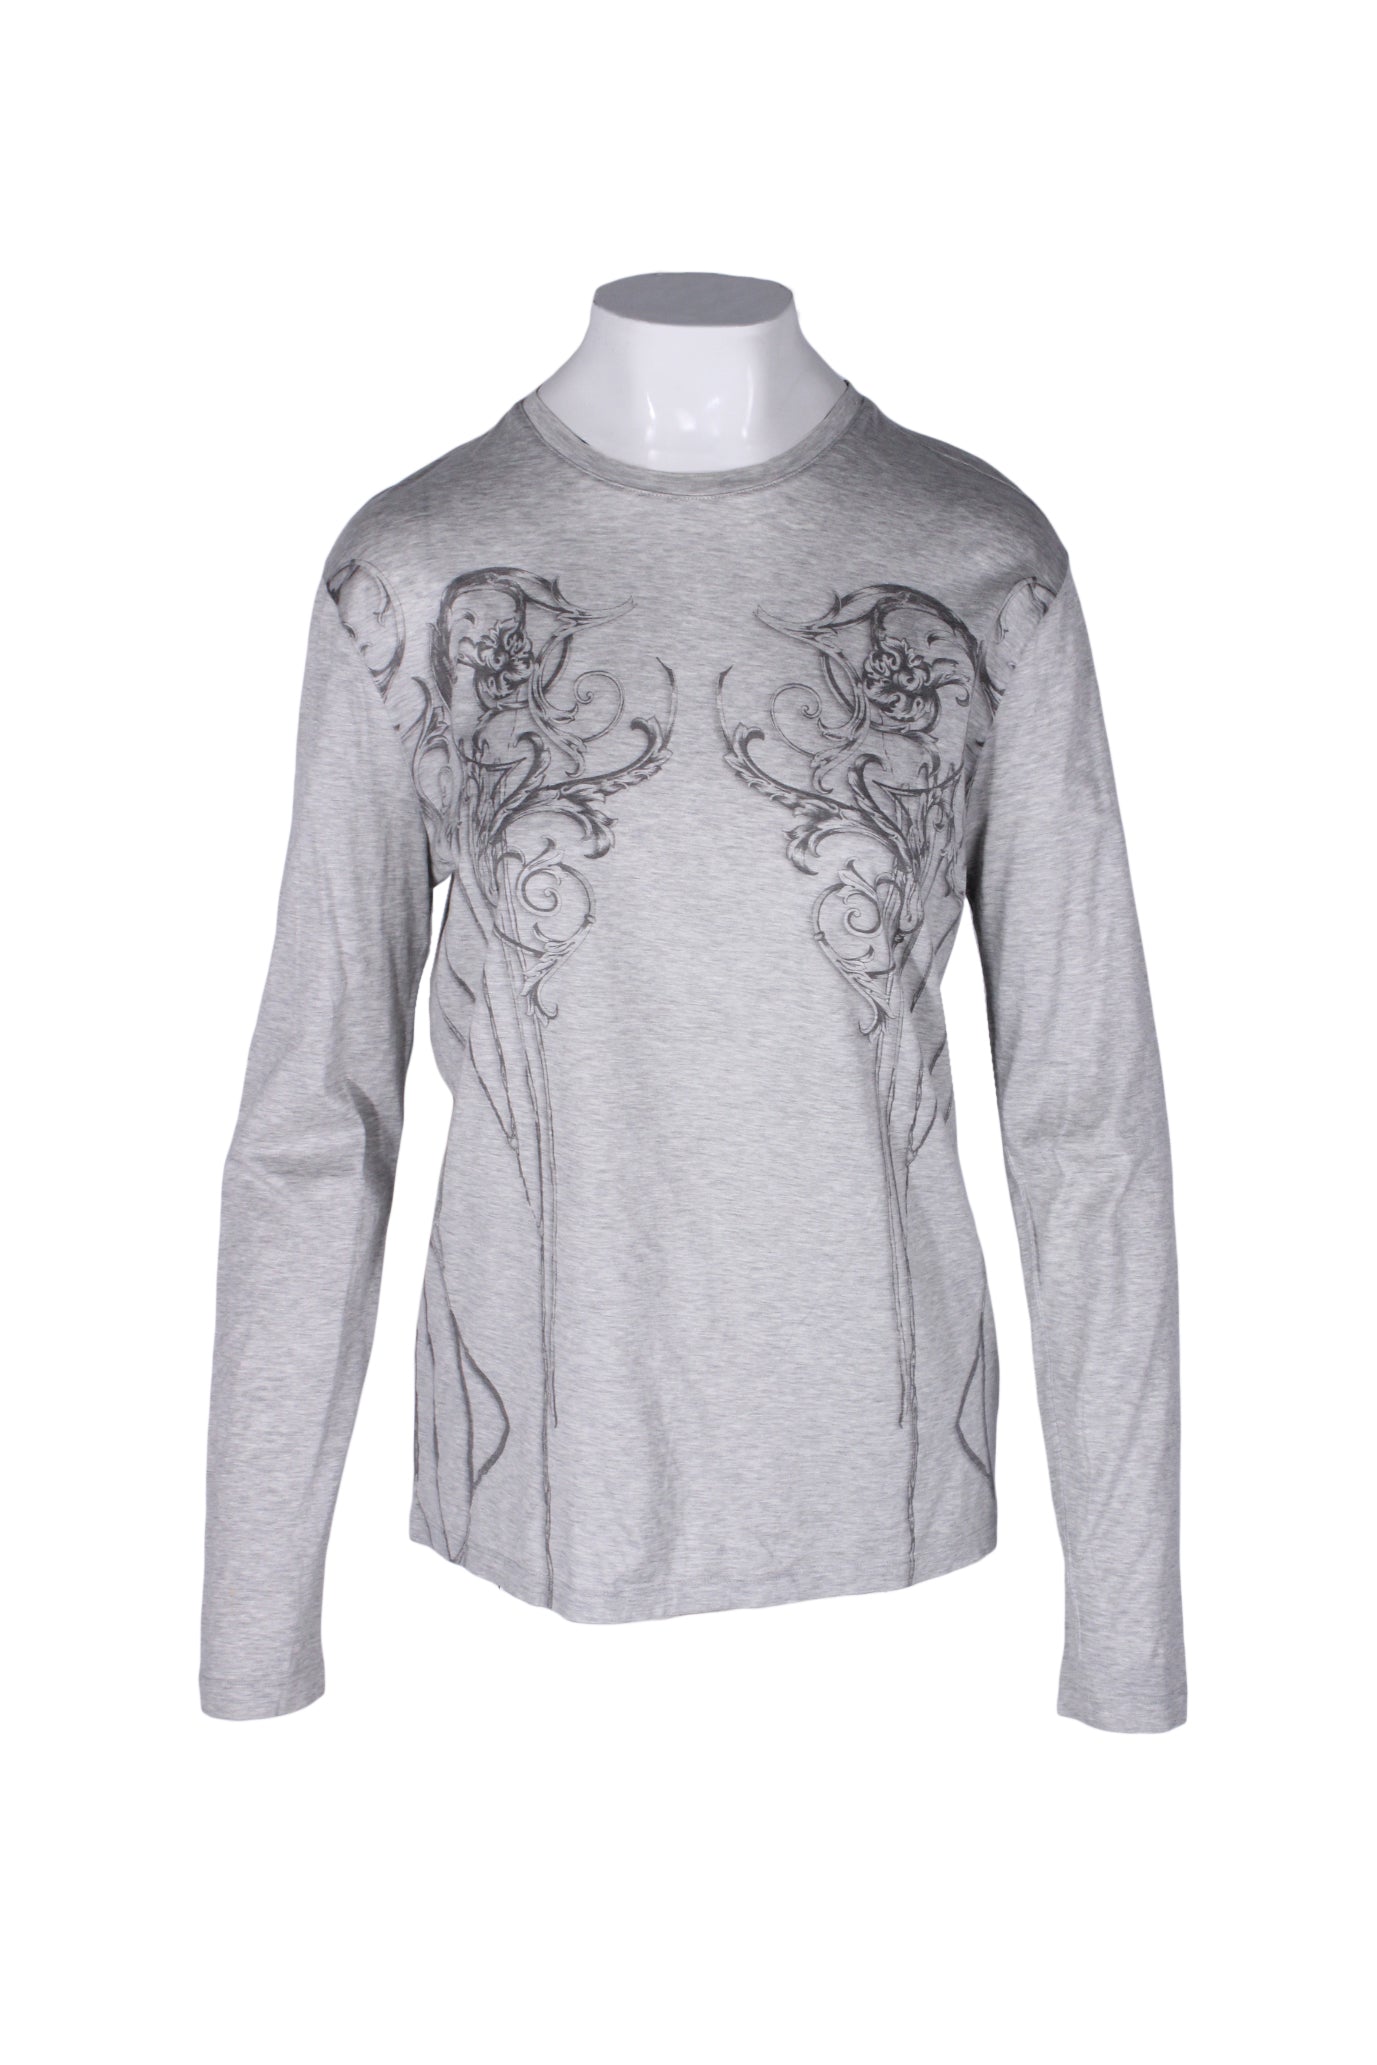 front angle versace collection light heather gray long sleeve t-shirt on feminine mannequin torso featuring charcoal scrollwork front graphics and crew collar.